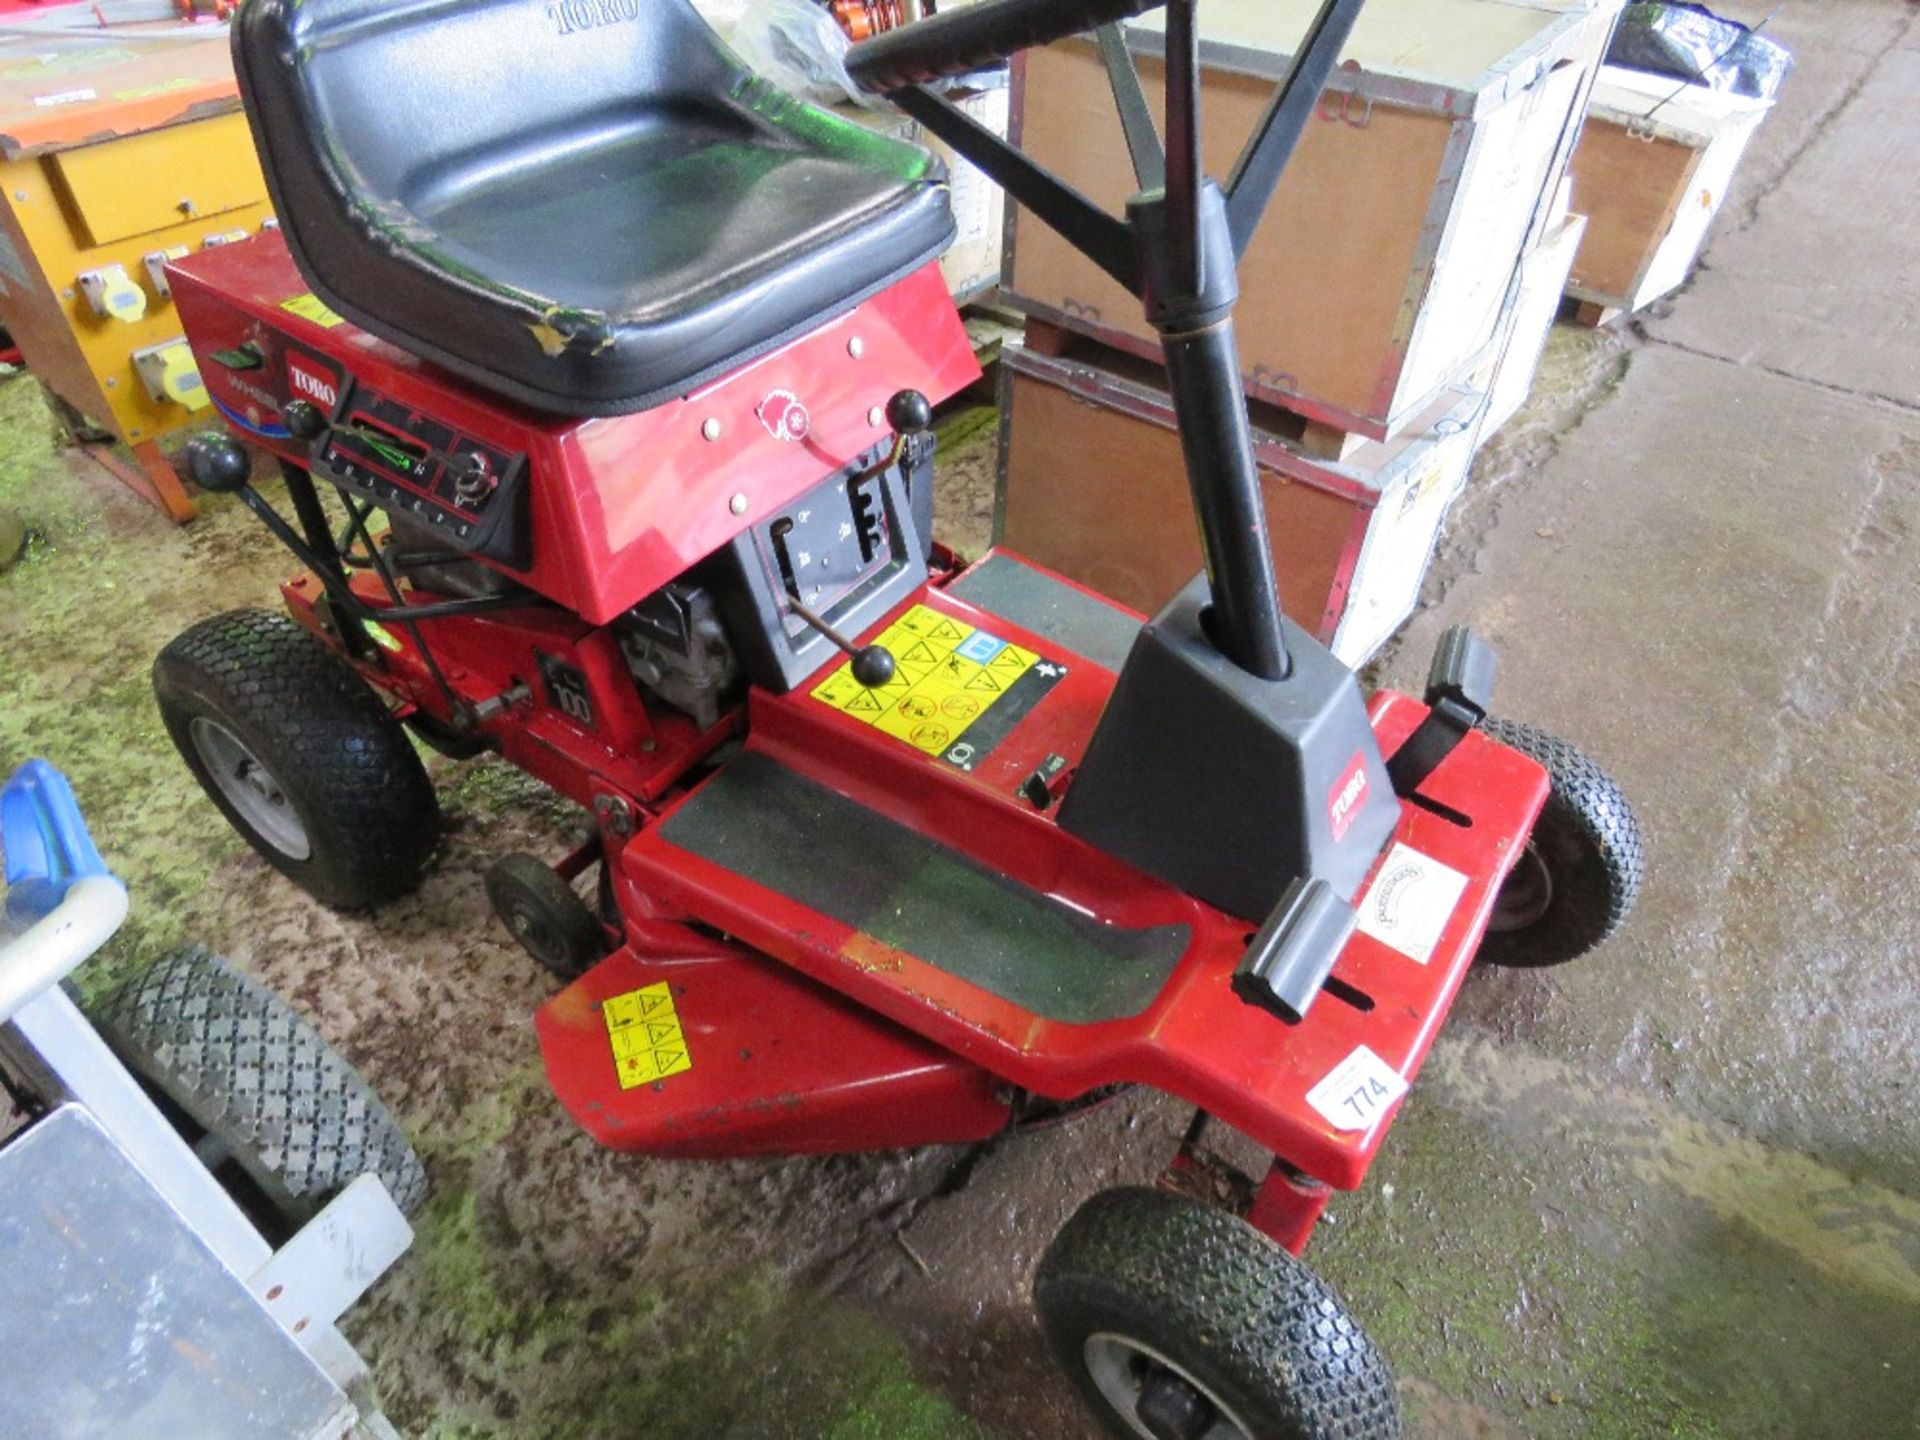 WHEELHORSE 8-25 RIDE ON MOWER. BATTERY LOW, UNTESTED.....THIS LOT IS SOLD UNDER THE AUCTIONEERS MARG